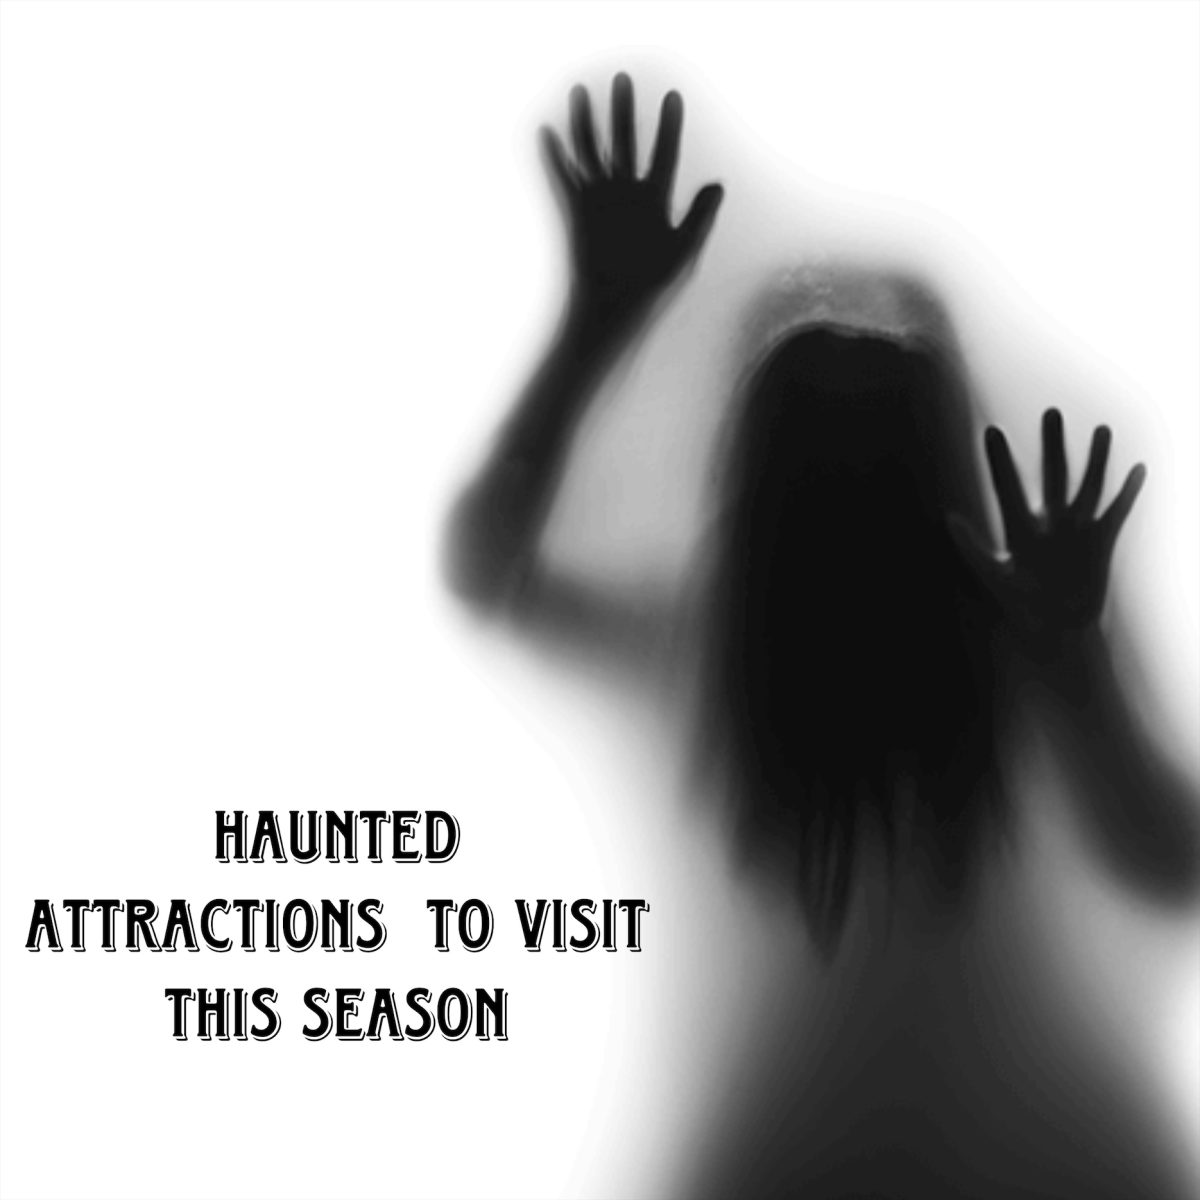 Haunted+attractions+to+visit+this+season